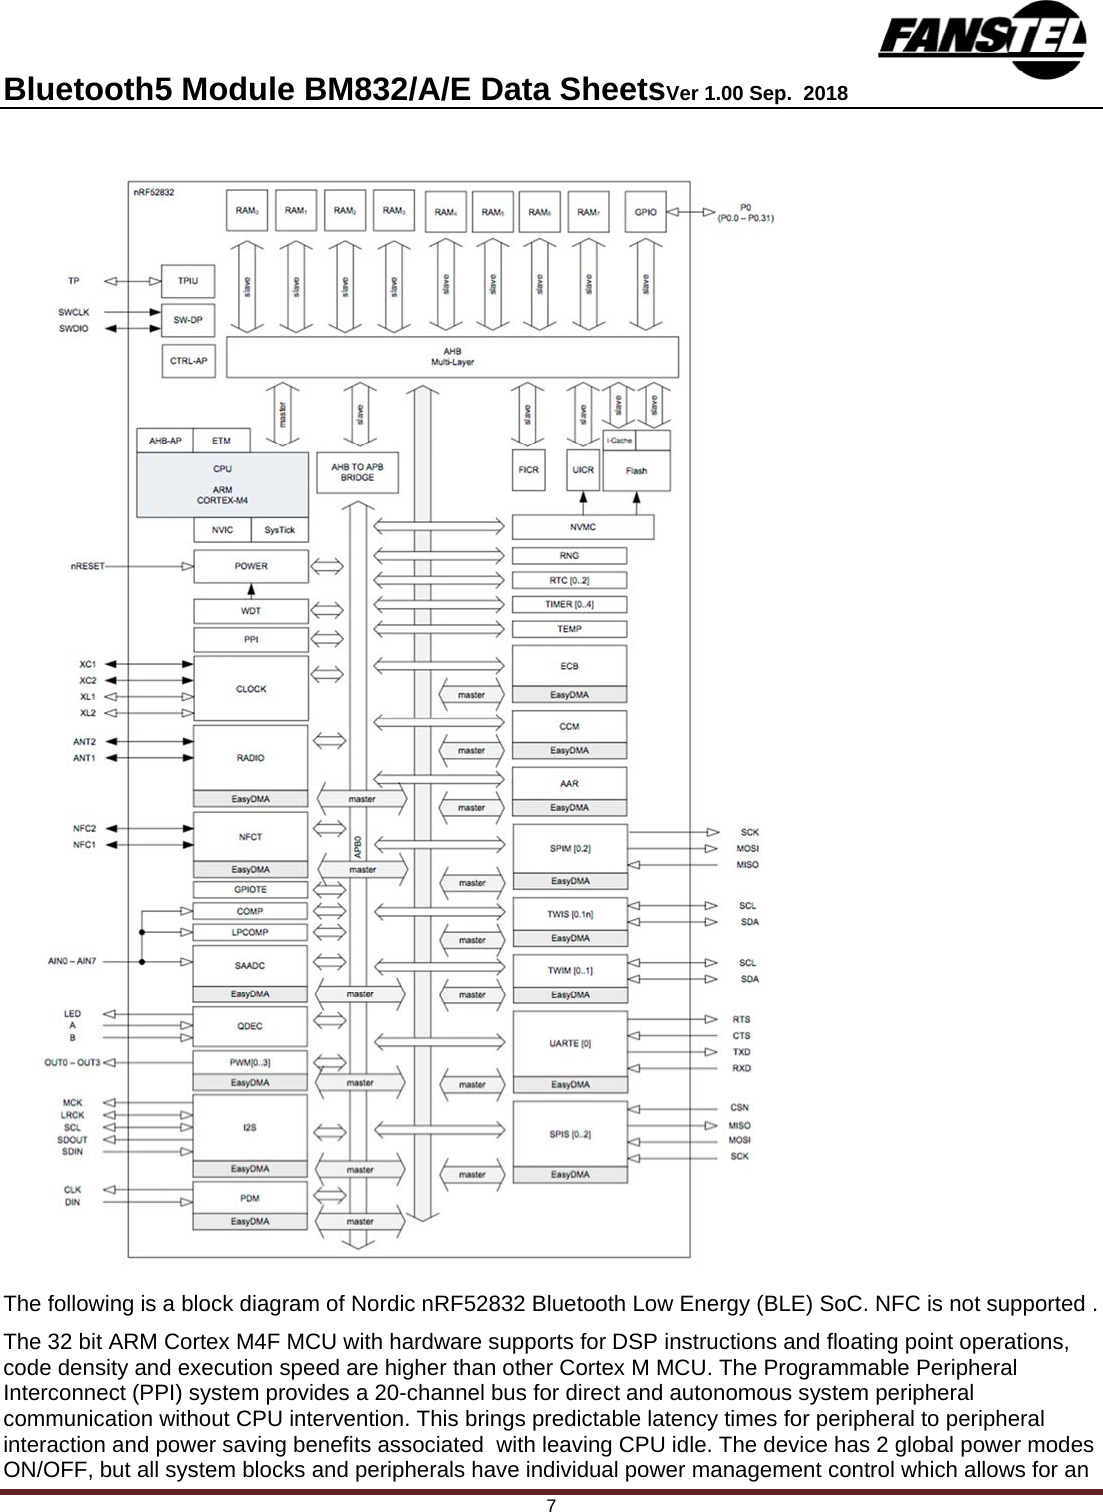 Bluetooth5 Module BM832/A/E Data SheetsVer 1.00 Sep.  2018 7 The following is a block diagram of Nordic nRF52832 Bluetooth Low Energy (BLE) SoC. NFC is not supported .  The 32 bit ARM Cortex M4F MCU with hardware supports for DSP instructions and floating point operations, code density and execution speed are higher than other Cortex M MCU. The Programmable Peripheral Interconnect (PPI) system provides a 20-channel bus for direct and autonomous system peripheral communication without CPU intervention. This brings predictable latency times for peripheral to peripheral interaction and power saving benefits associated  with leaving CPU idle. The device has 2 global power modes ON/OFF, but all system blocks and peripherals have individual power management control which allows for an 